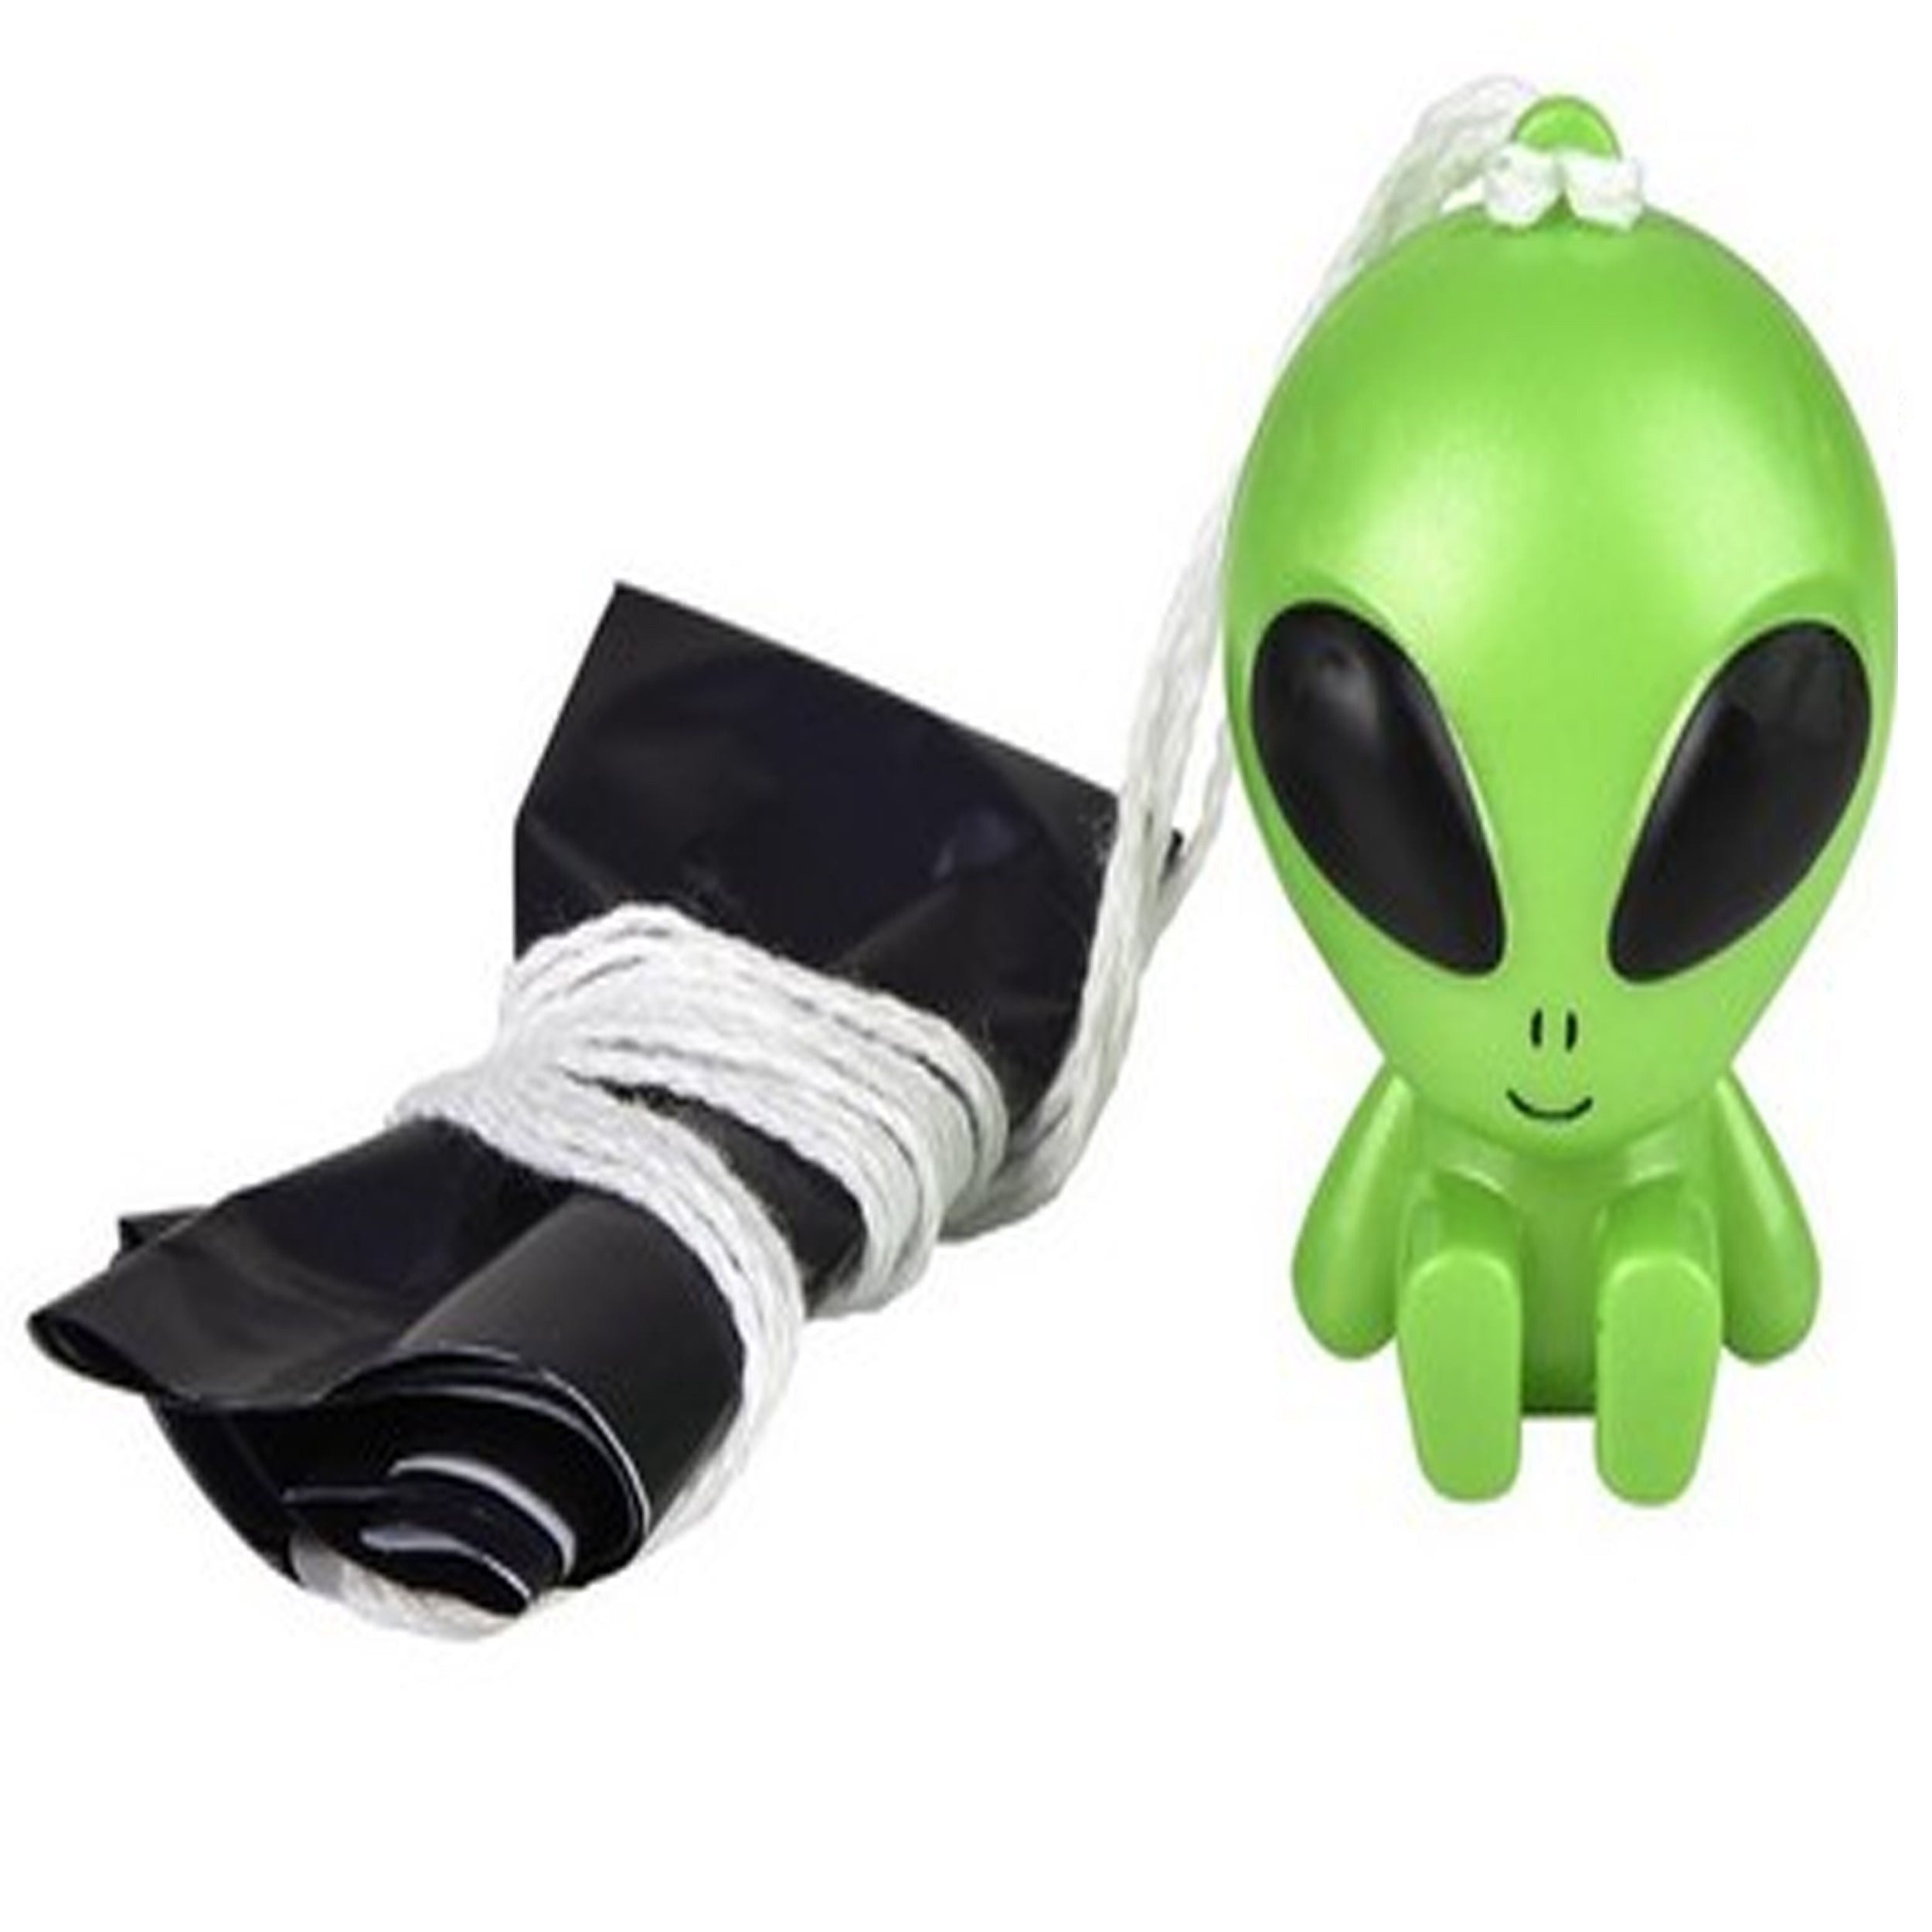 Alien Paratroopers with Parachutes - Durable Plastic Guys Playset